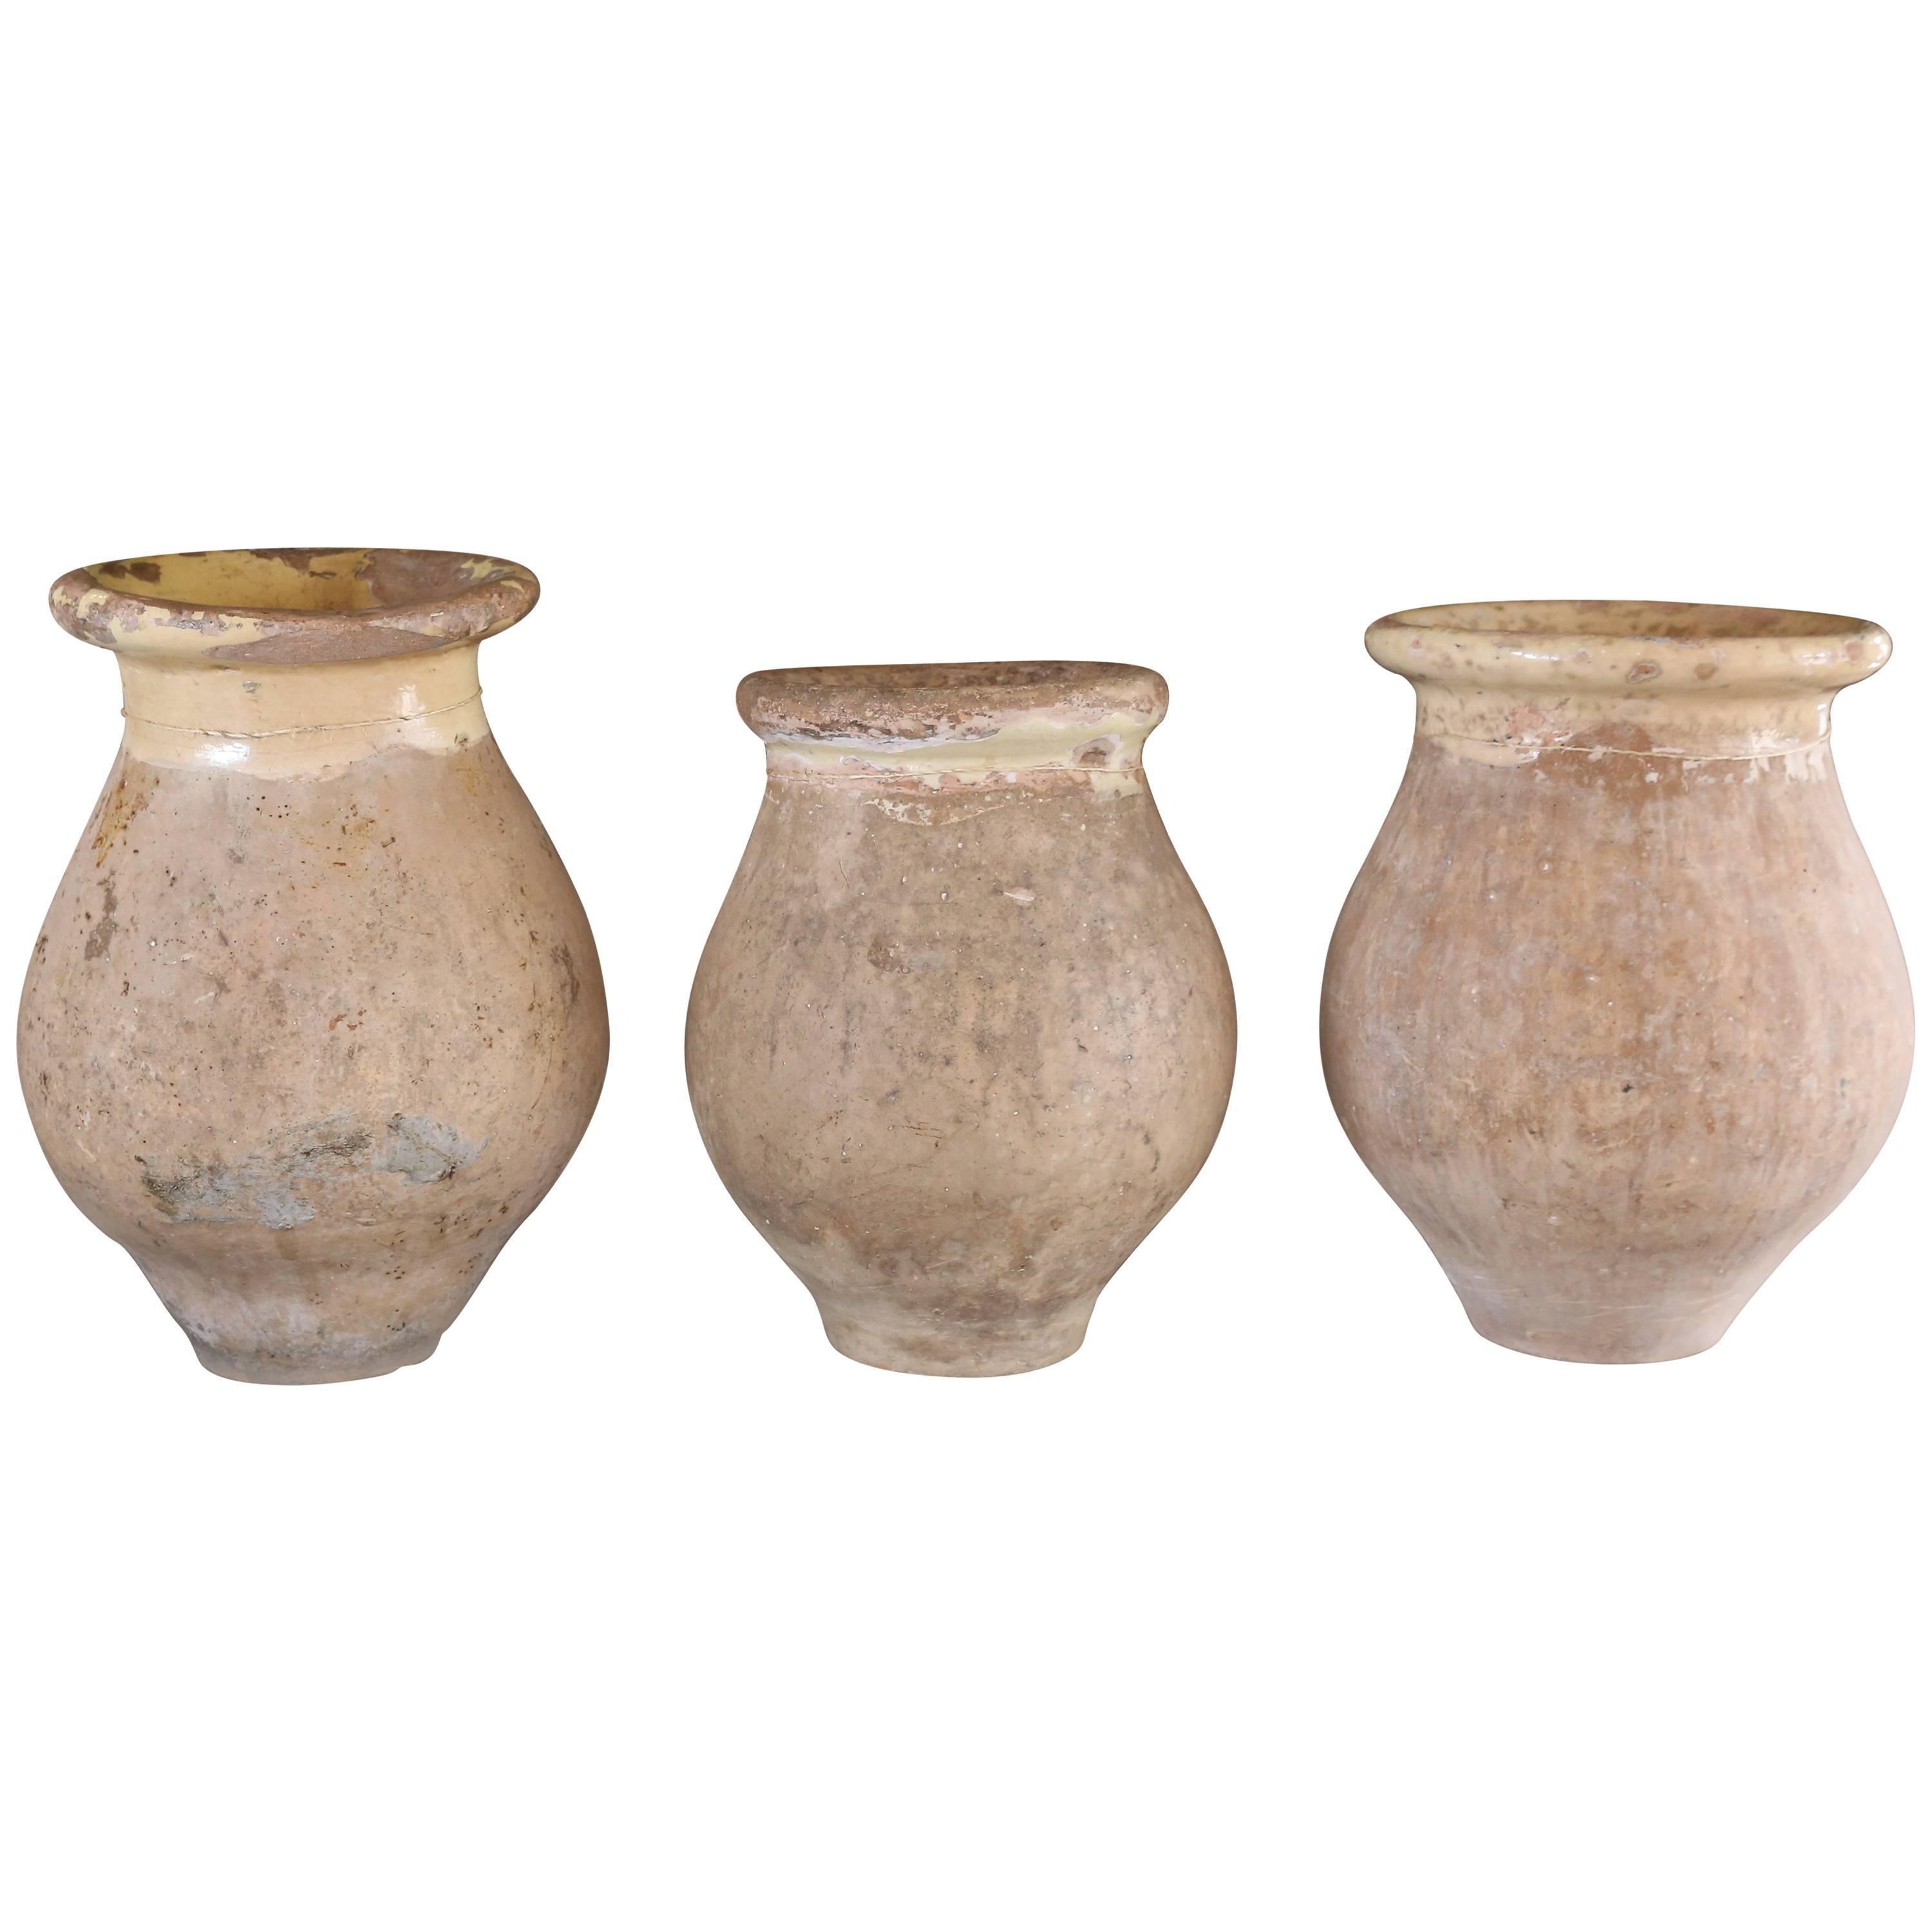 Small Biot Jars from France